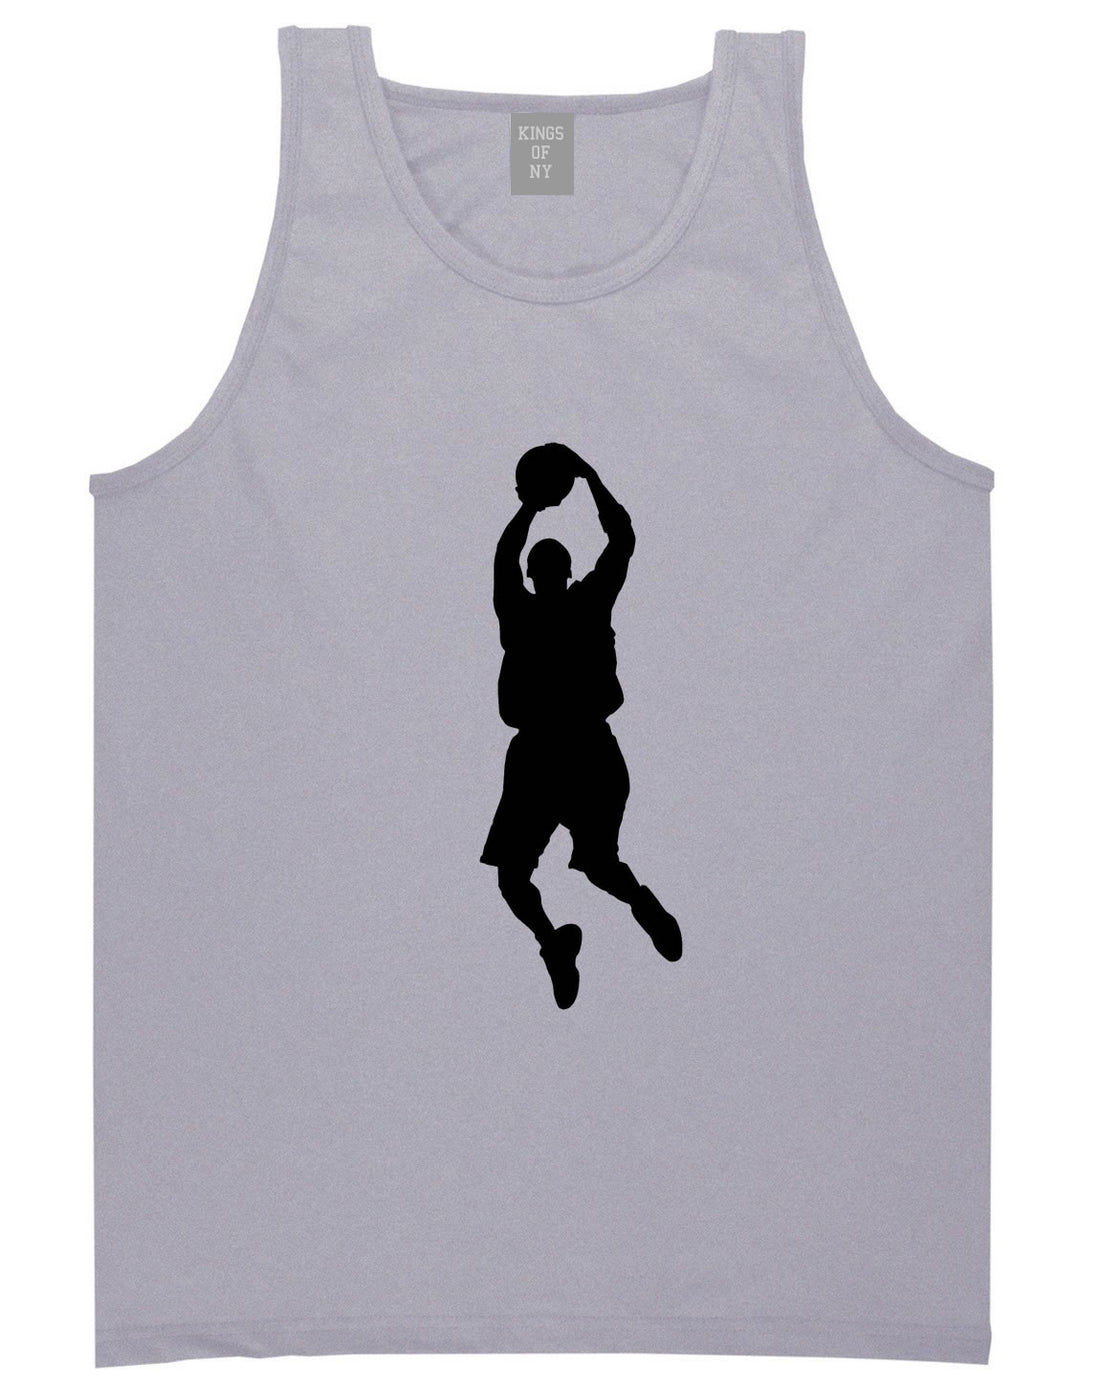 Basketball Shooter Tank Top by Kings Of NY